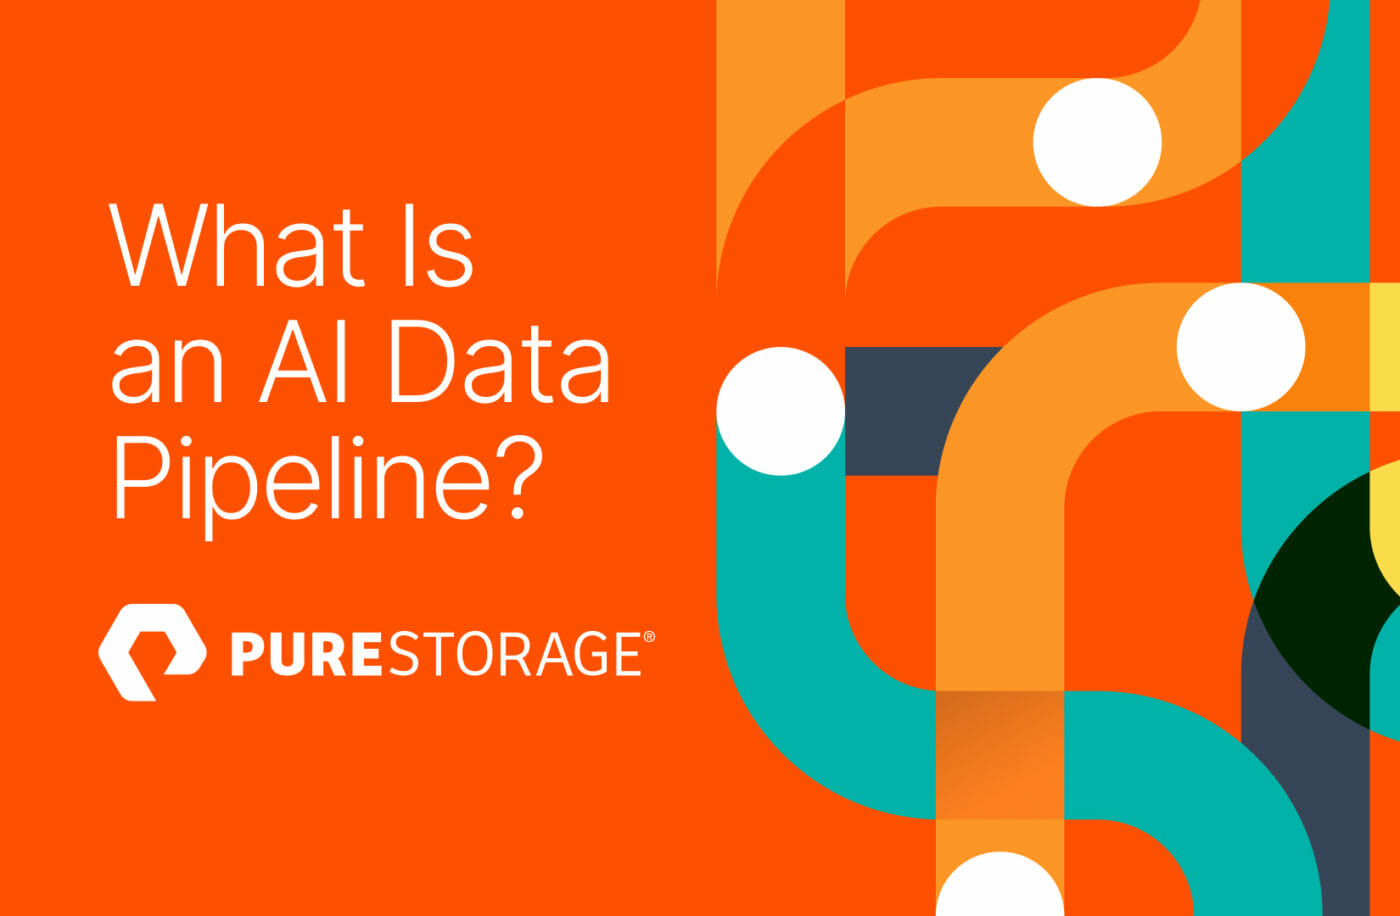 What is an AI Data Pipeline